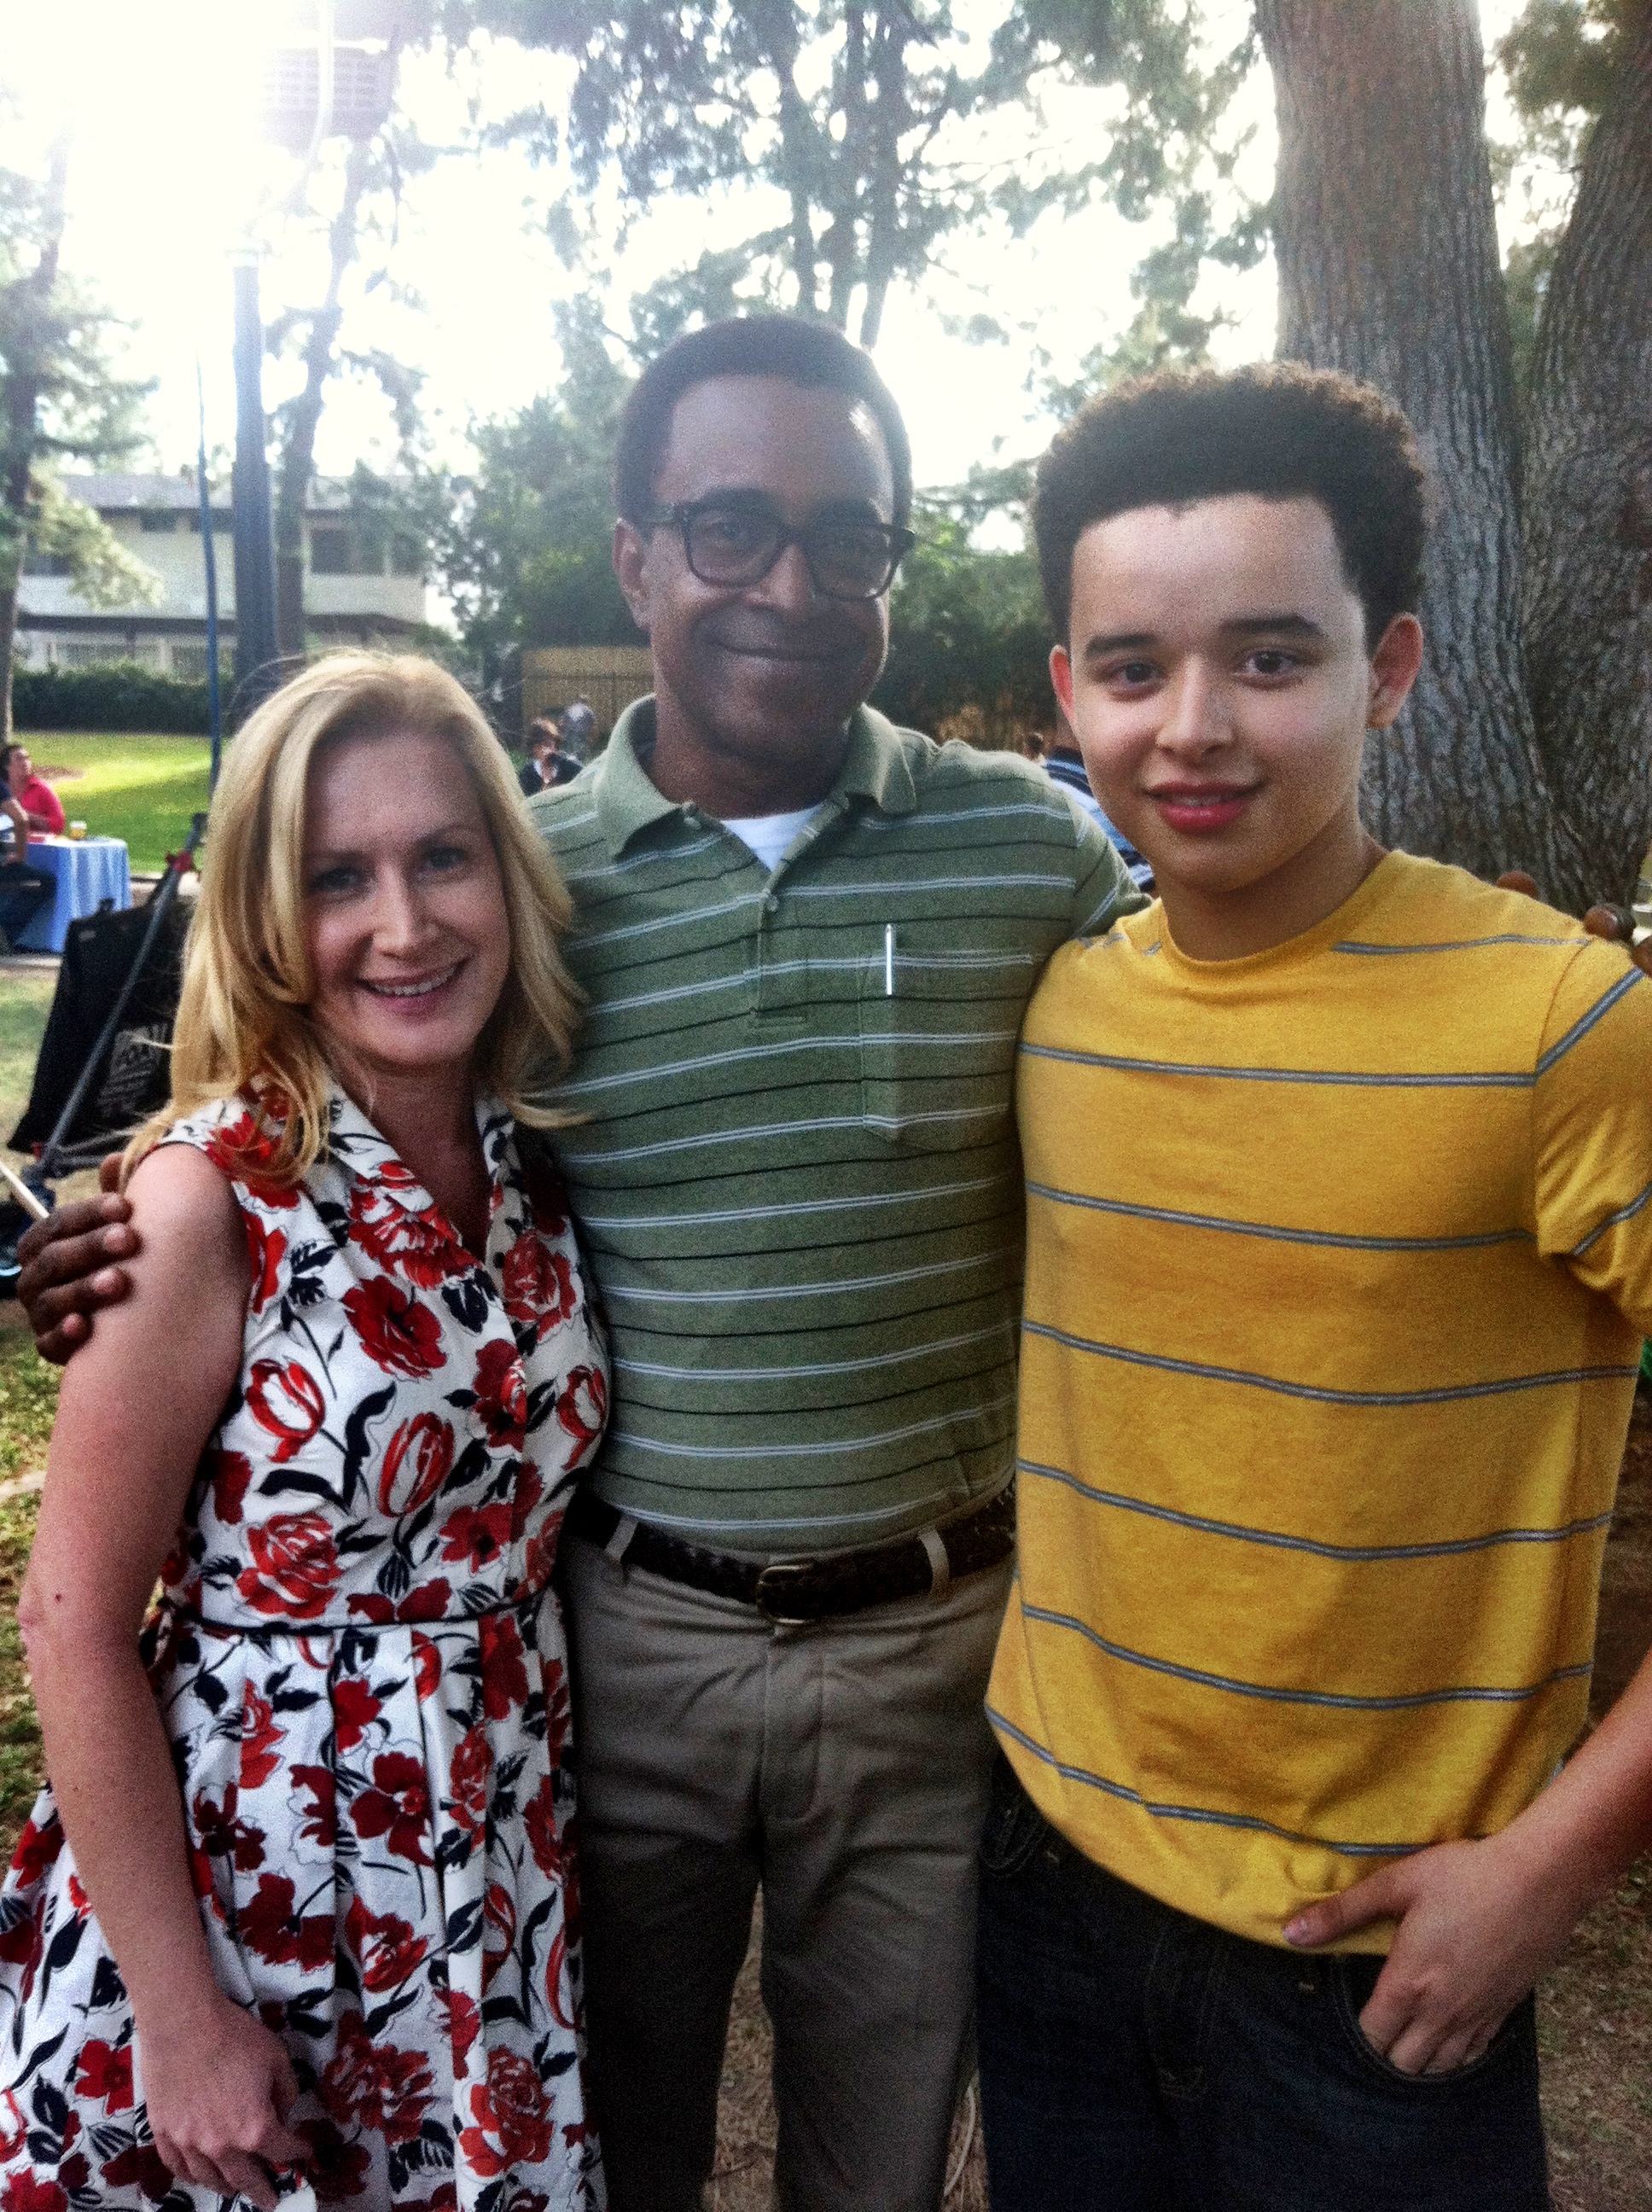 On the set of The Gabriels with Tim Meadows and Angela Kinsey